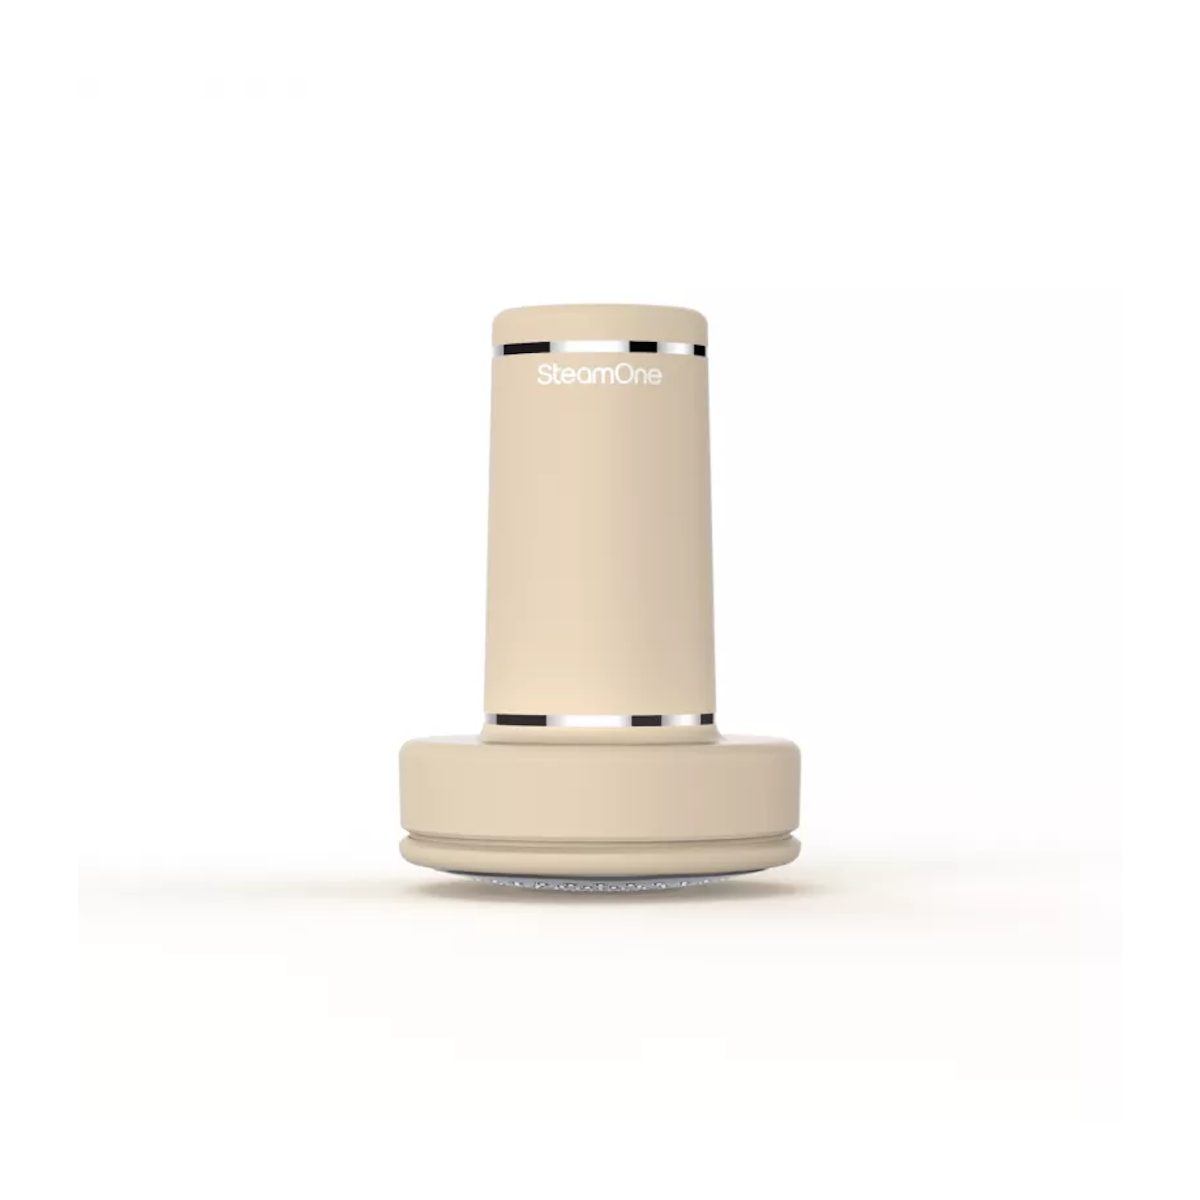 STEAMONE RP10B fabric shaver - ivory